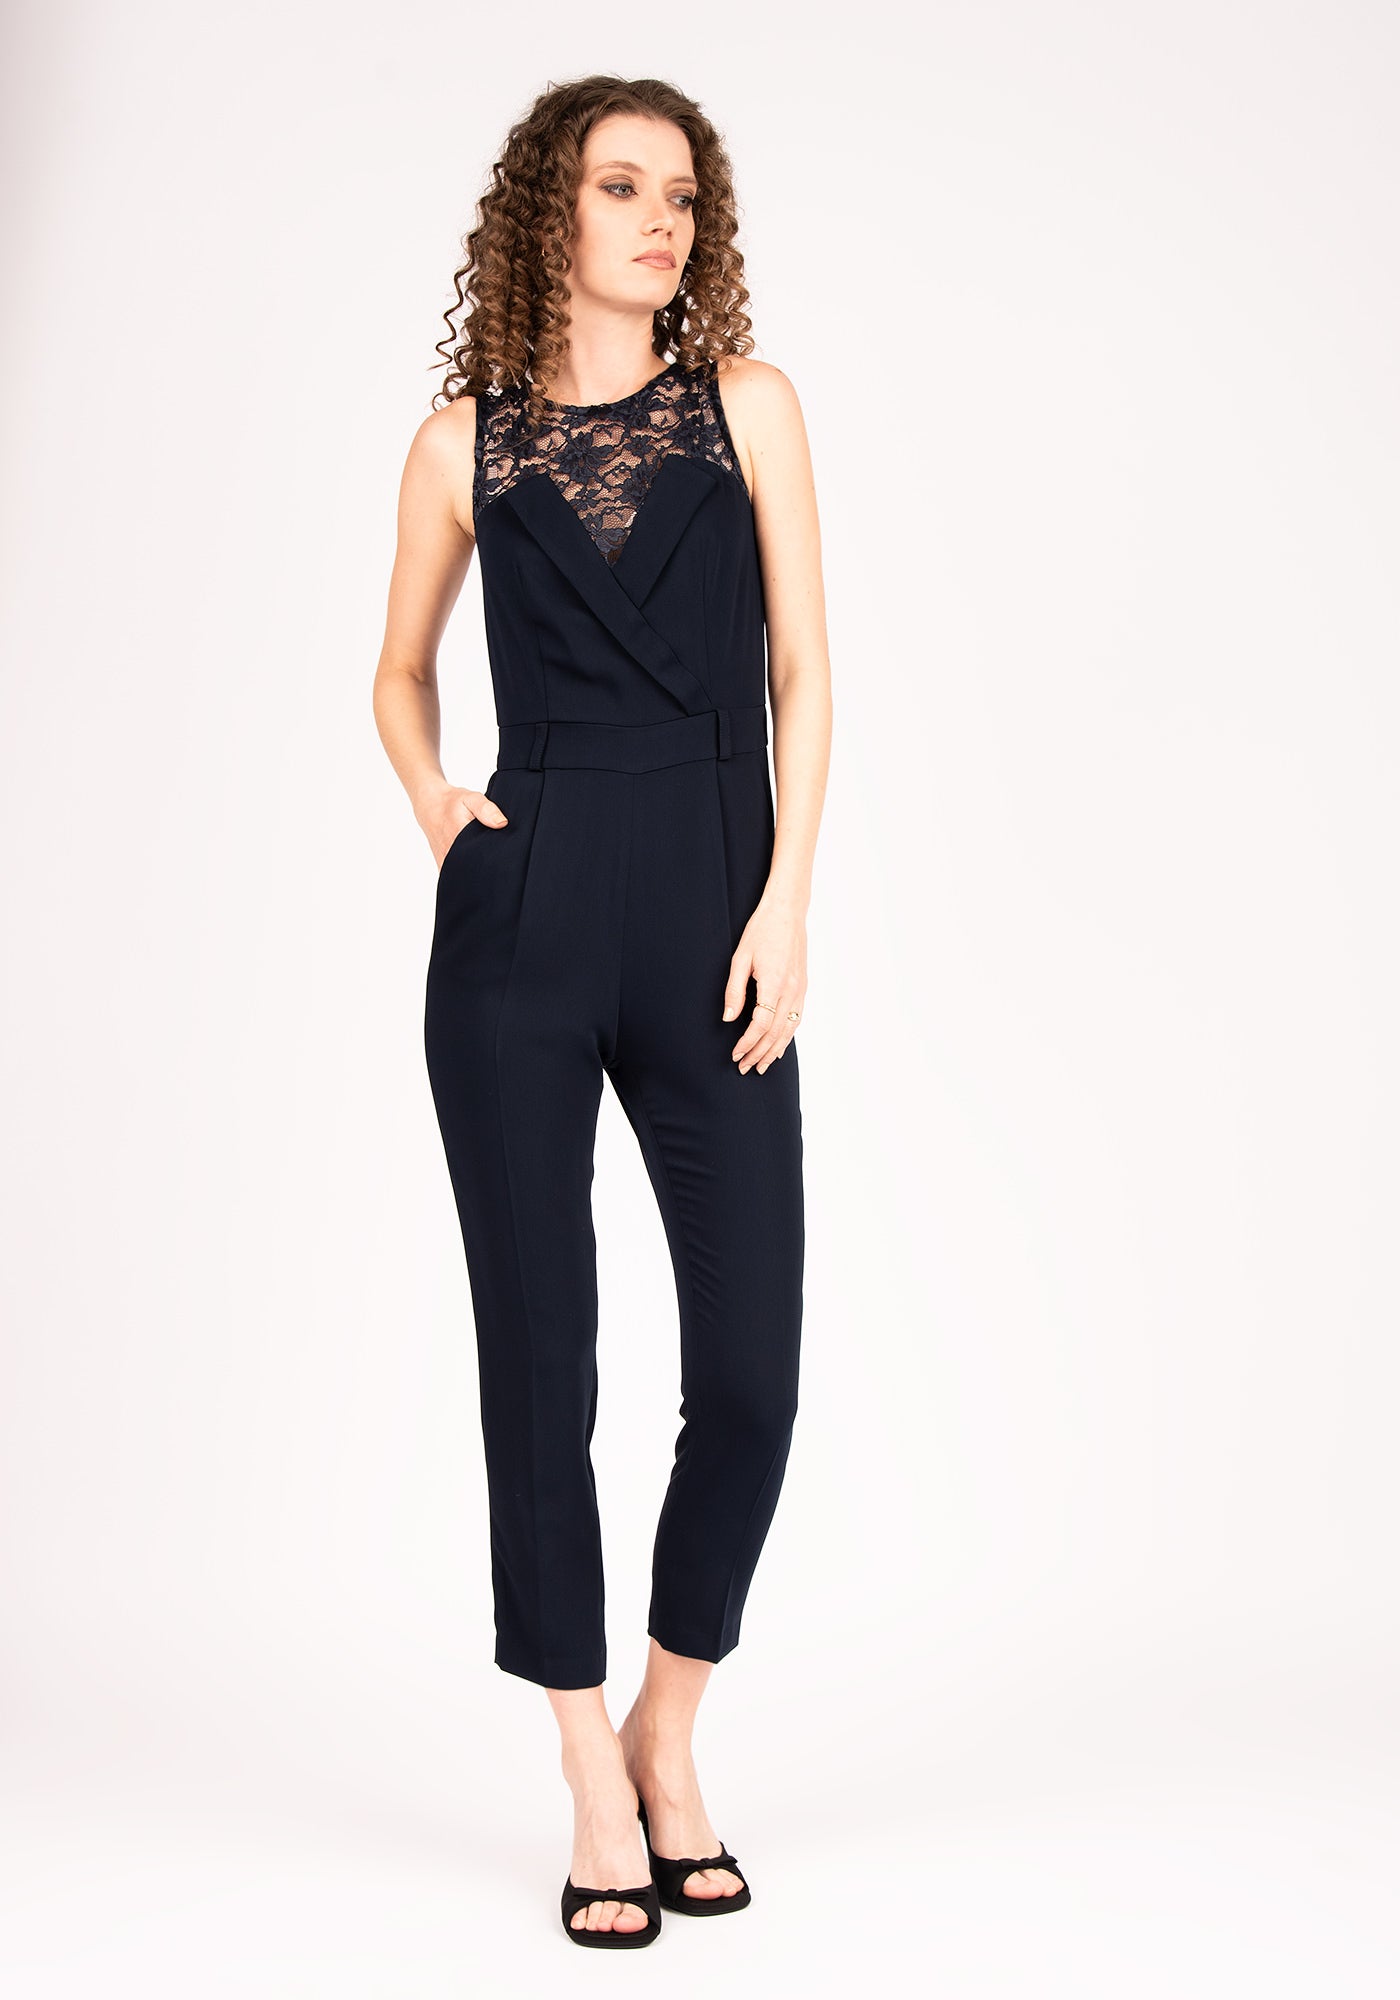 Women's Formal Jumpsuit with Lace Details in Navy